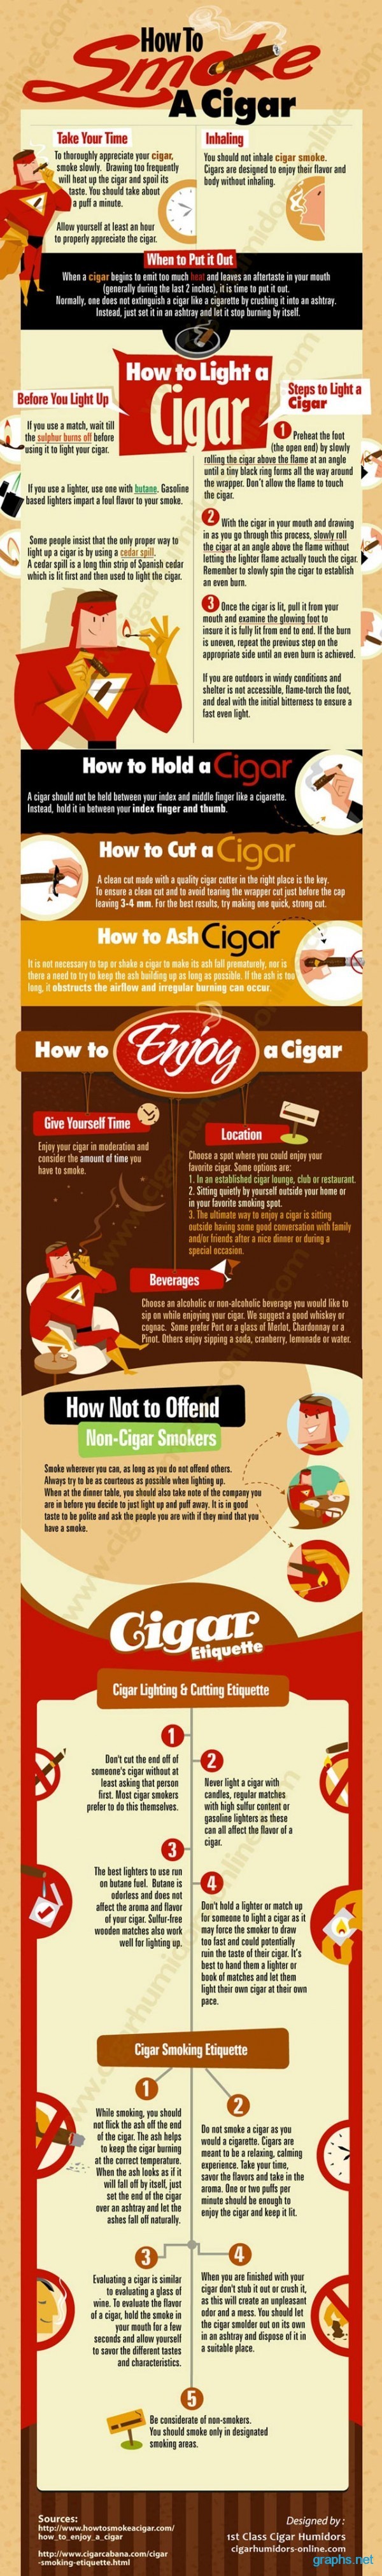 smoking cigarette facts